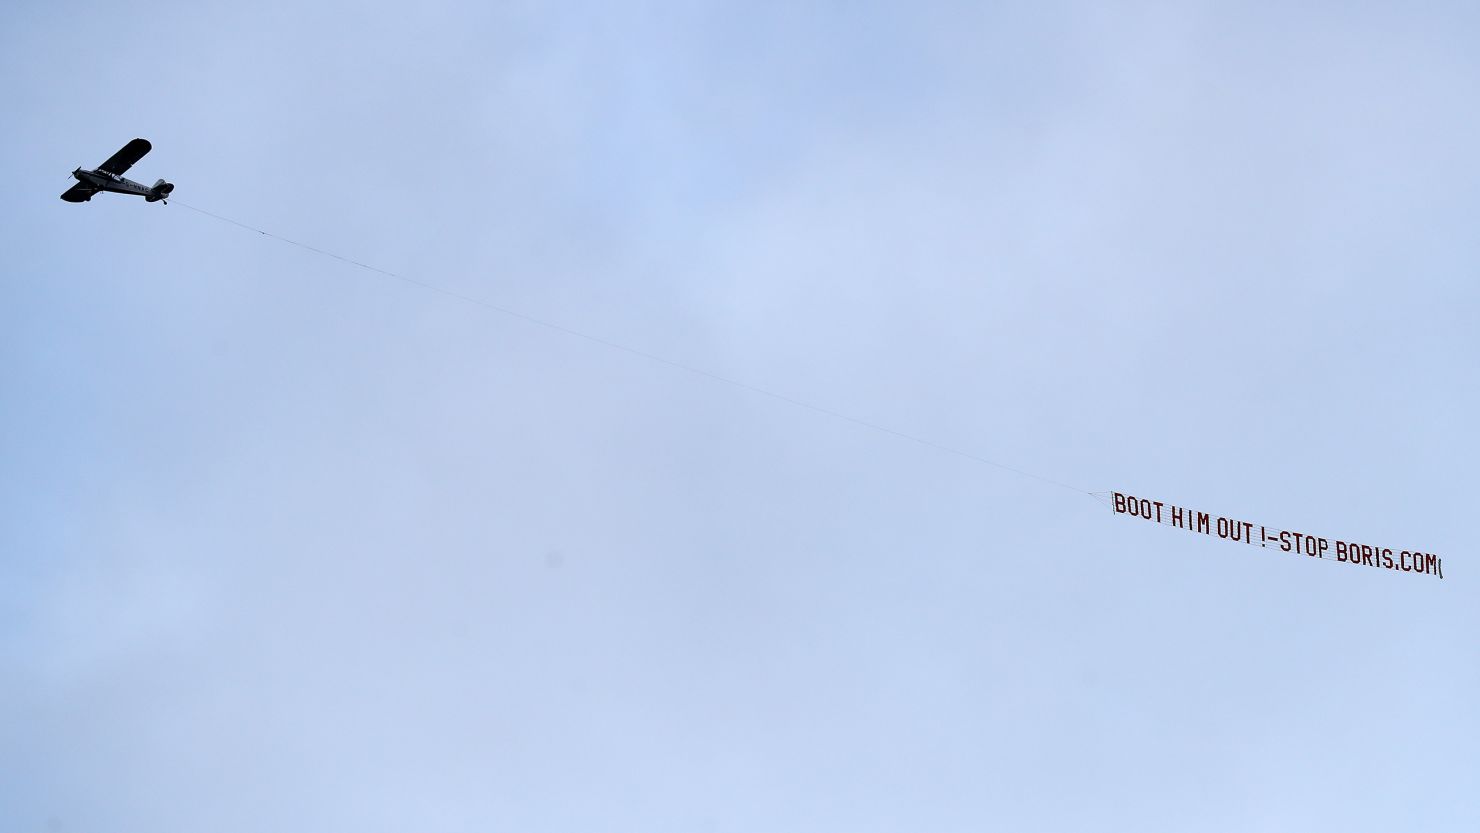 A plane flies over the stadium with a message directed to UK Prime Minister Boris Johnson during the Premier League match between Leeds United and Newcastle United at Elland Road.